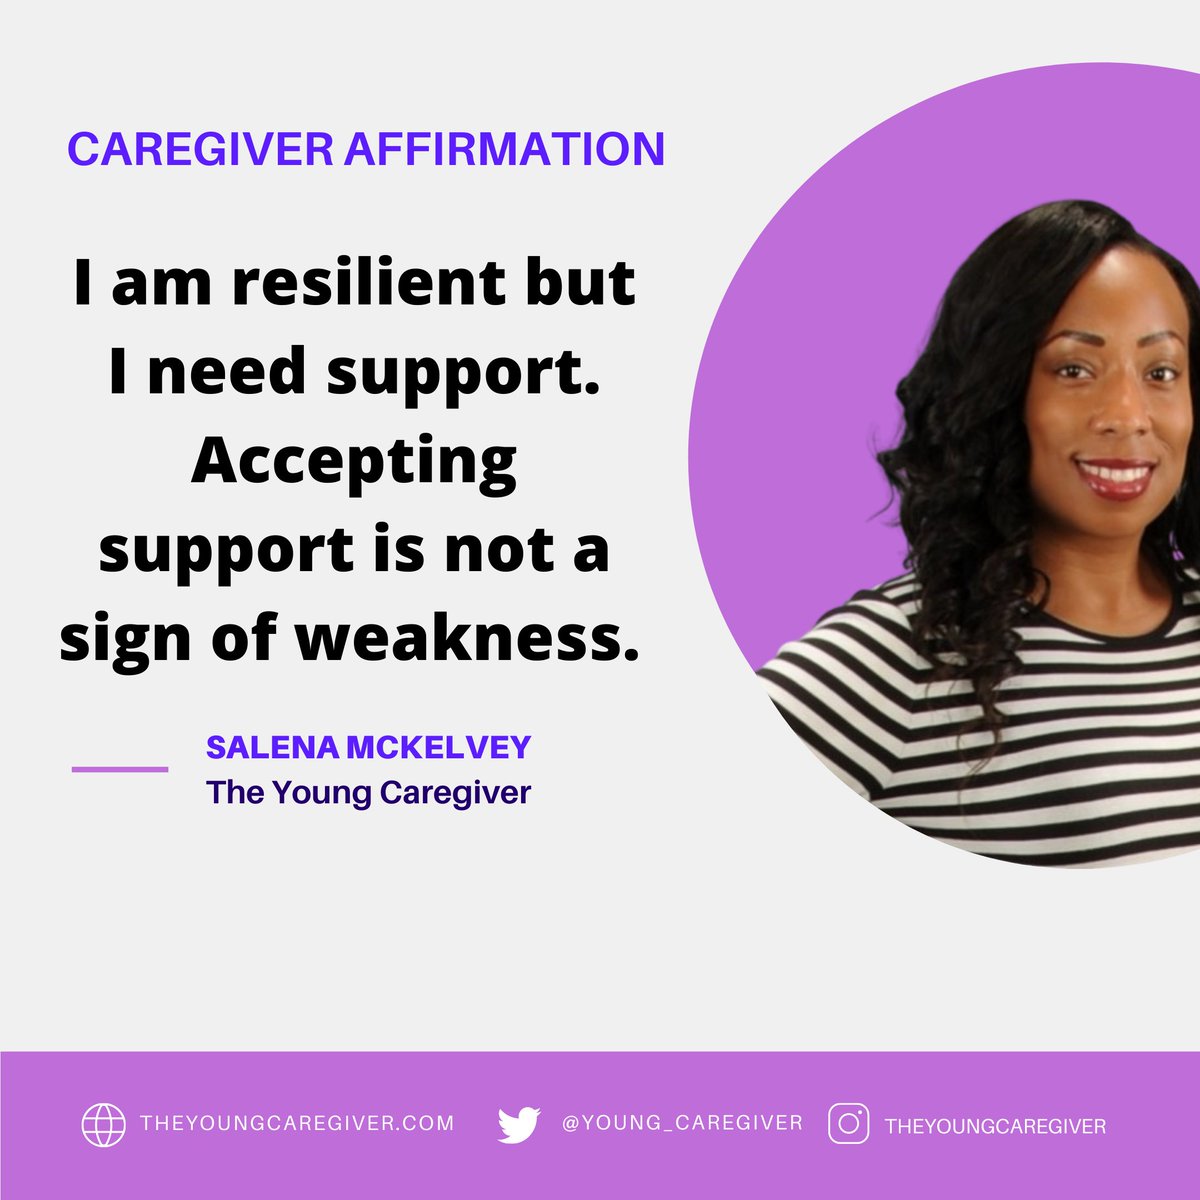 Support comes in all forms. Allow people to show up for you in the capacity they are able to. Store runs, cooking food, sitting with your loved one while you nap or run an errand. #theyoungcaregiver #caregiver #selflove #selfcare #caregiveraffirmations